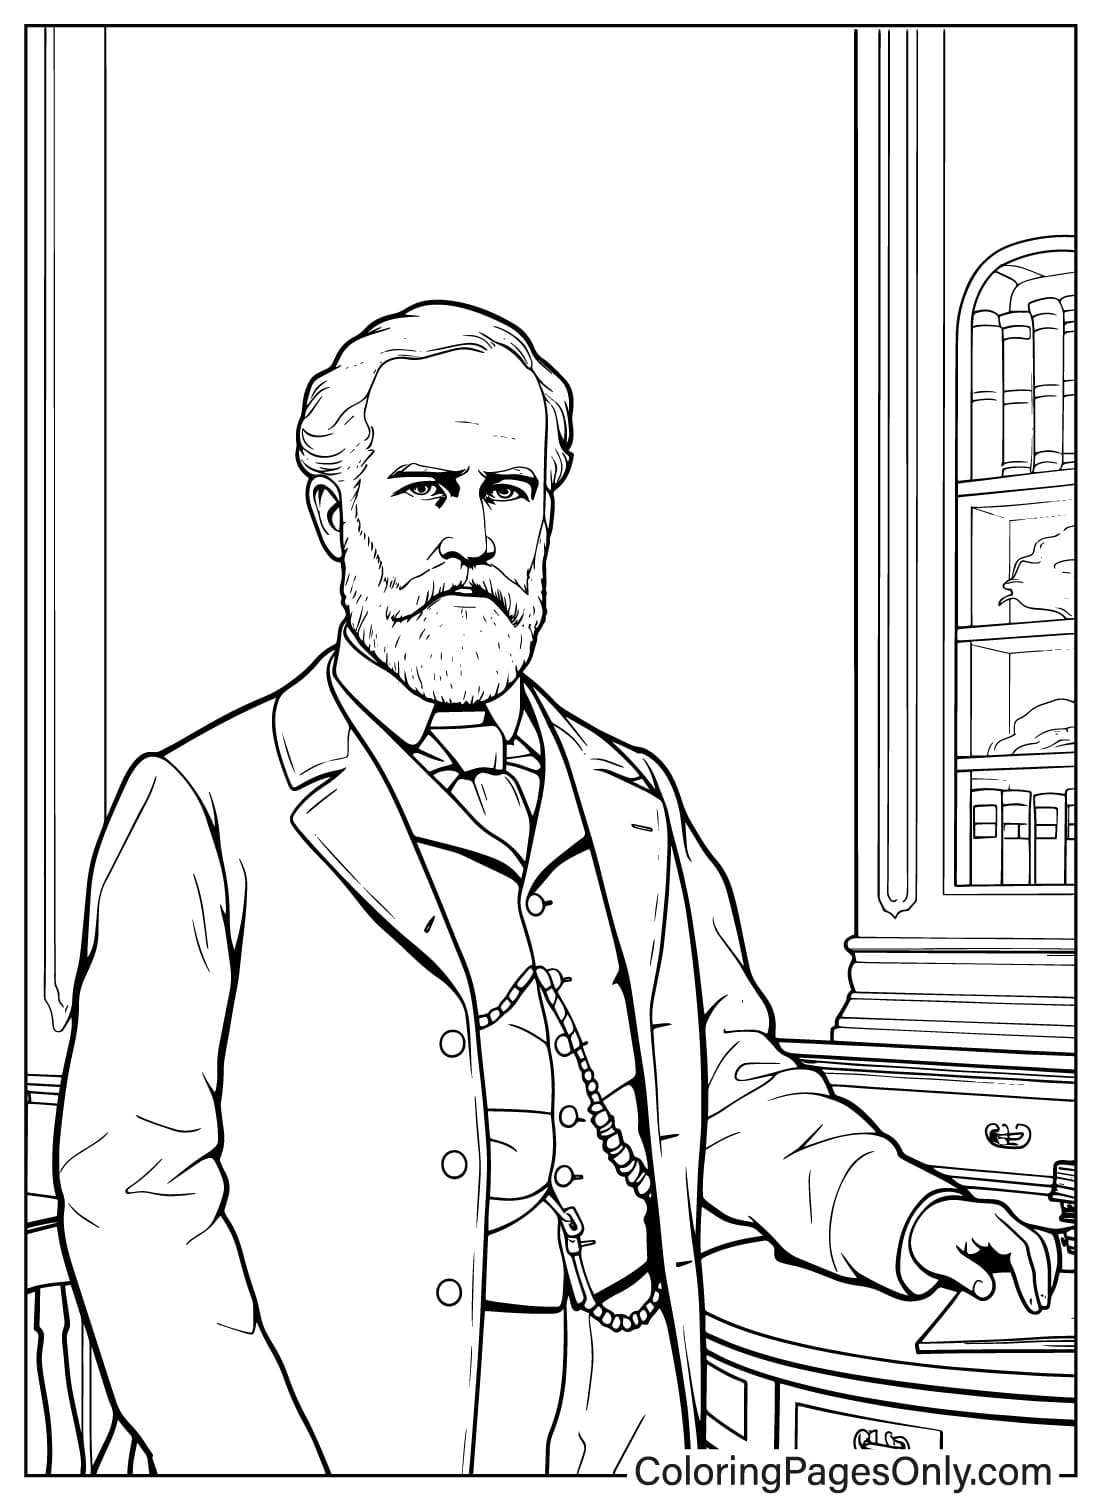 Robert e lee coloring page free